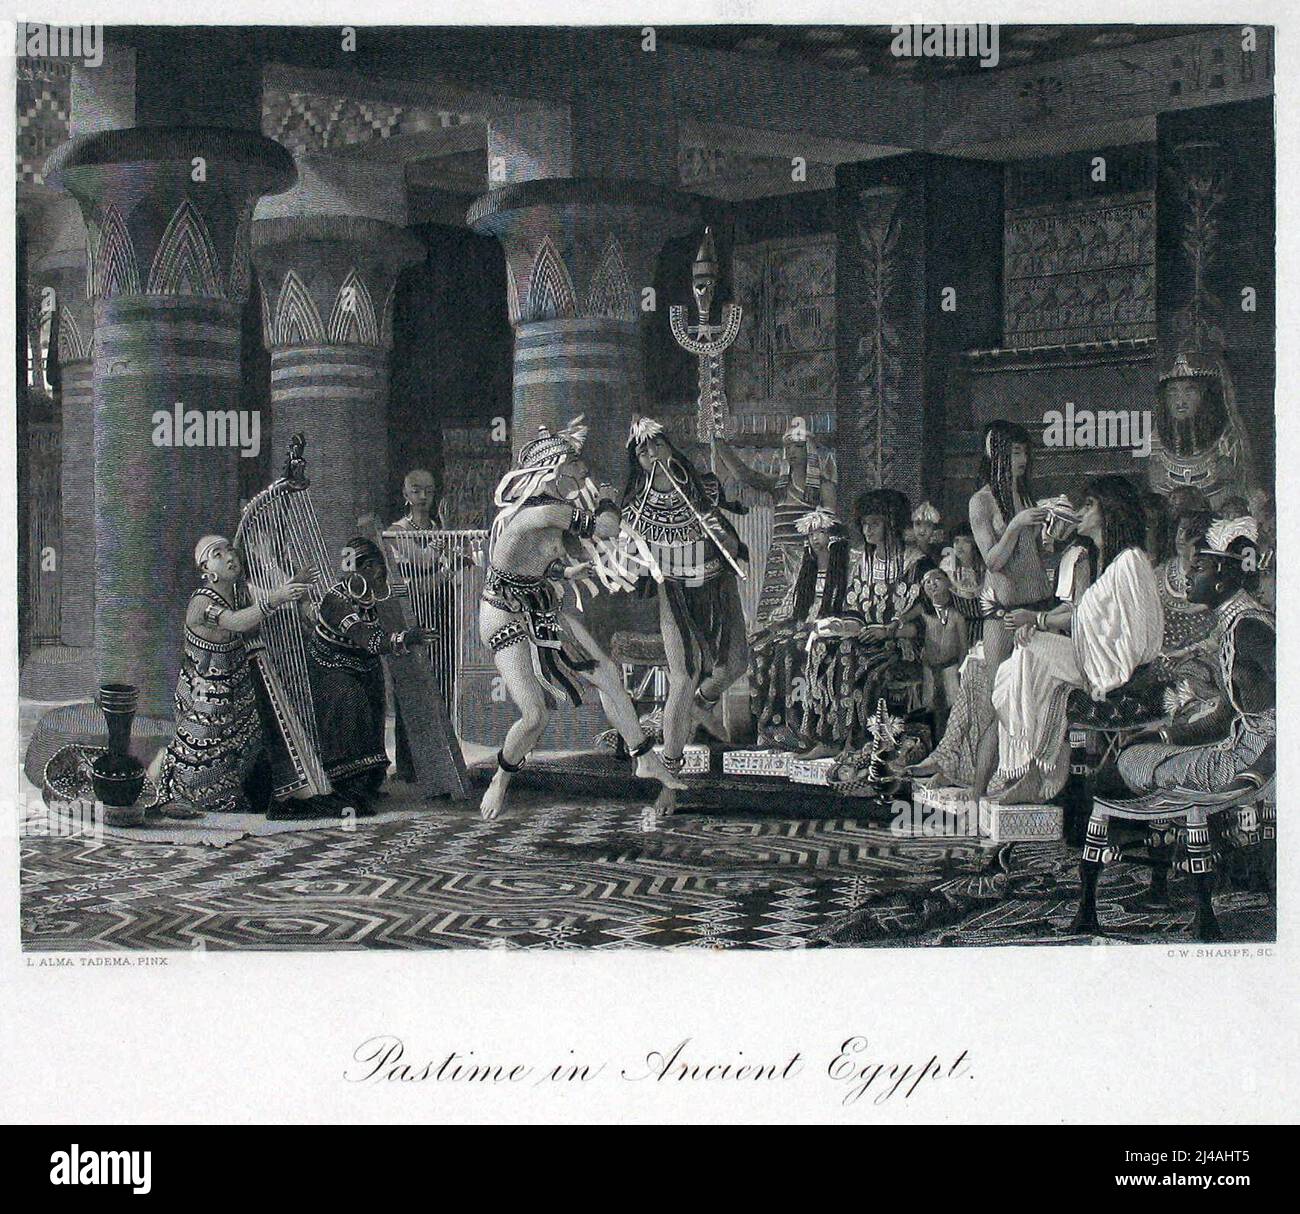 'Pasttimes in Ancient Egypt' an engraving by C.W. Sharpe after a painting by L. Alma Tadema. Print from the International Gallery published by George Barrie, 1880s. Stock Photo